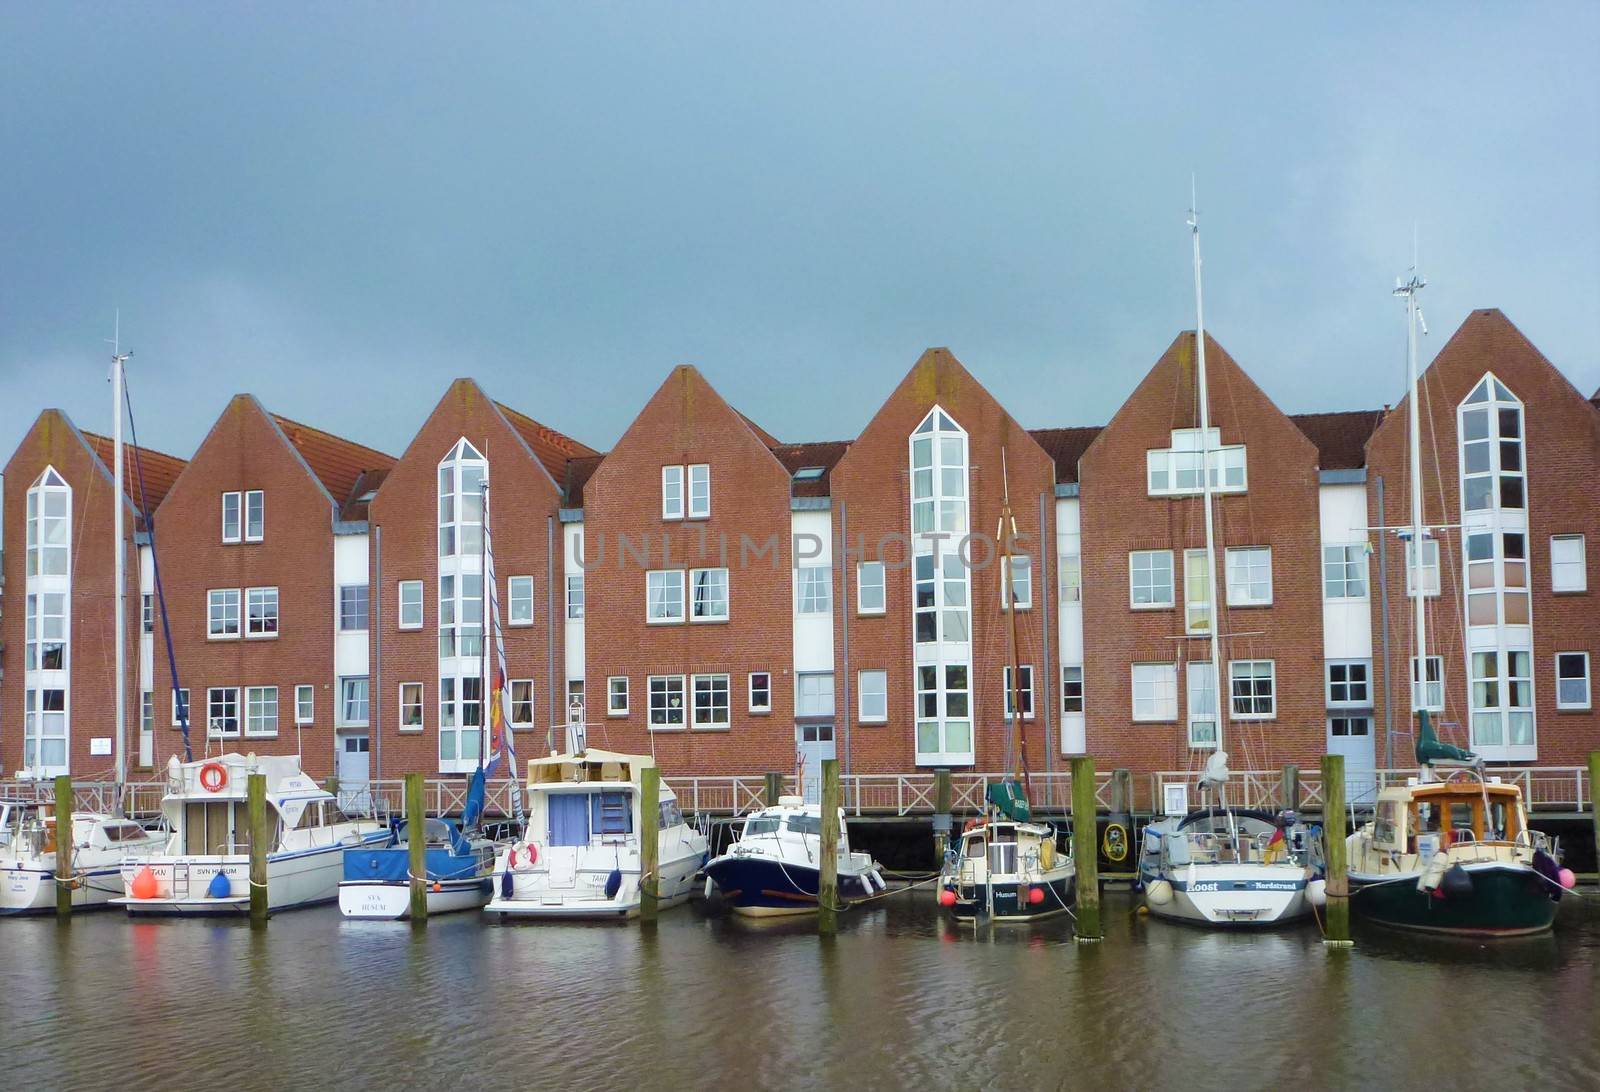 Port of Husum with boats and brick houses by pisces2386